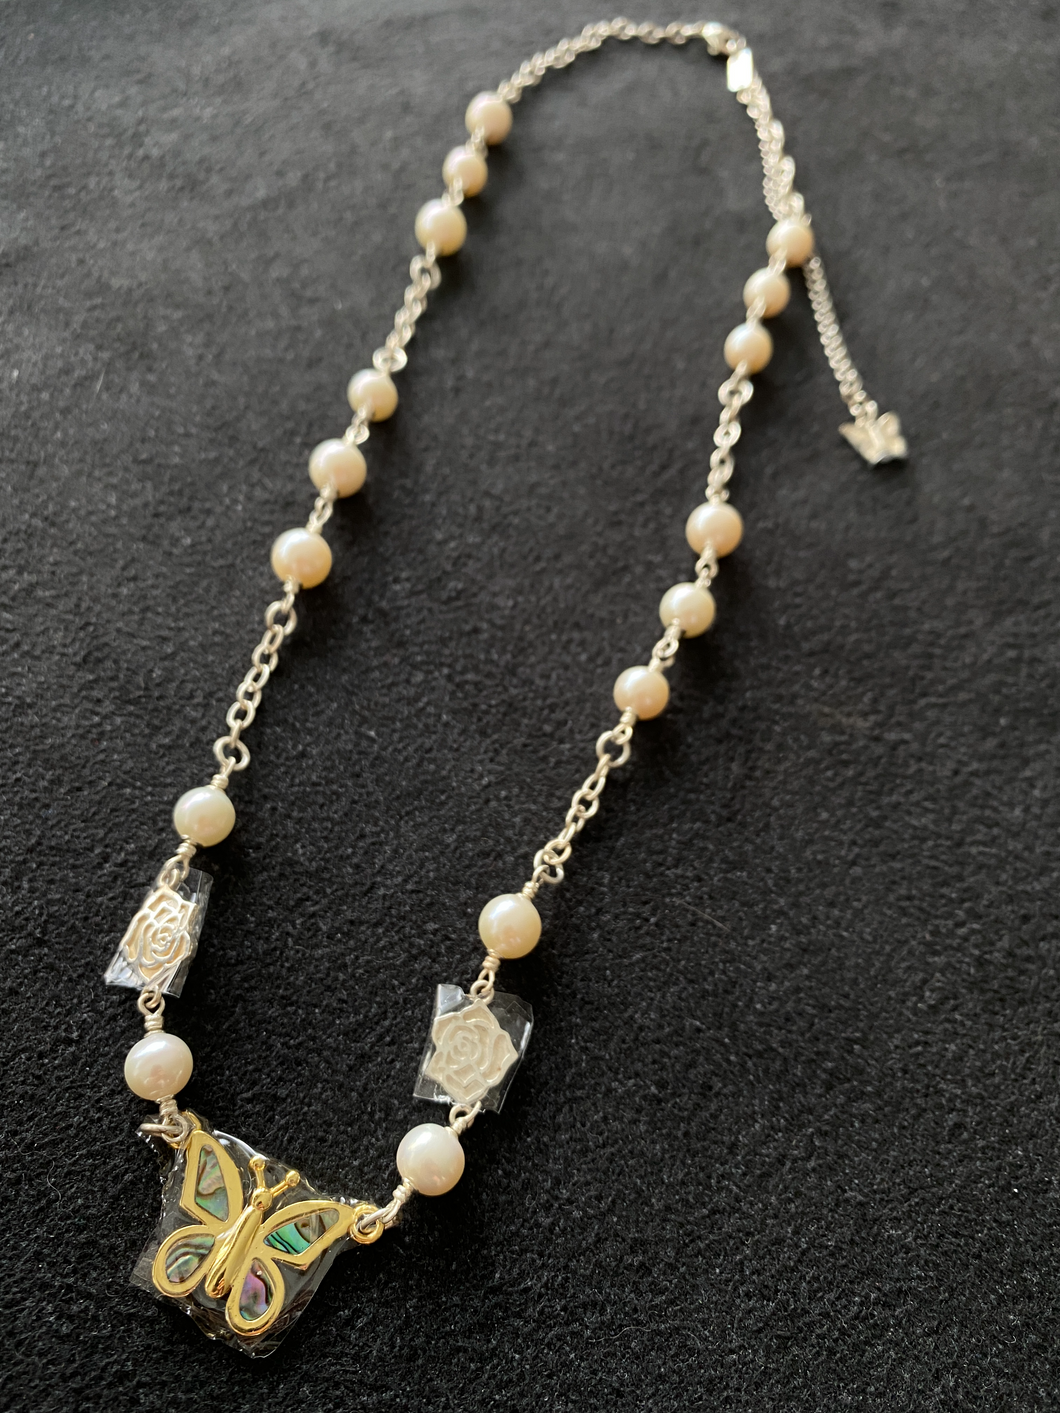 K18/S925 Handmade White Angel Pearl Necklace